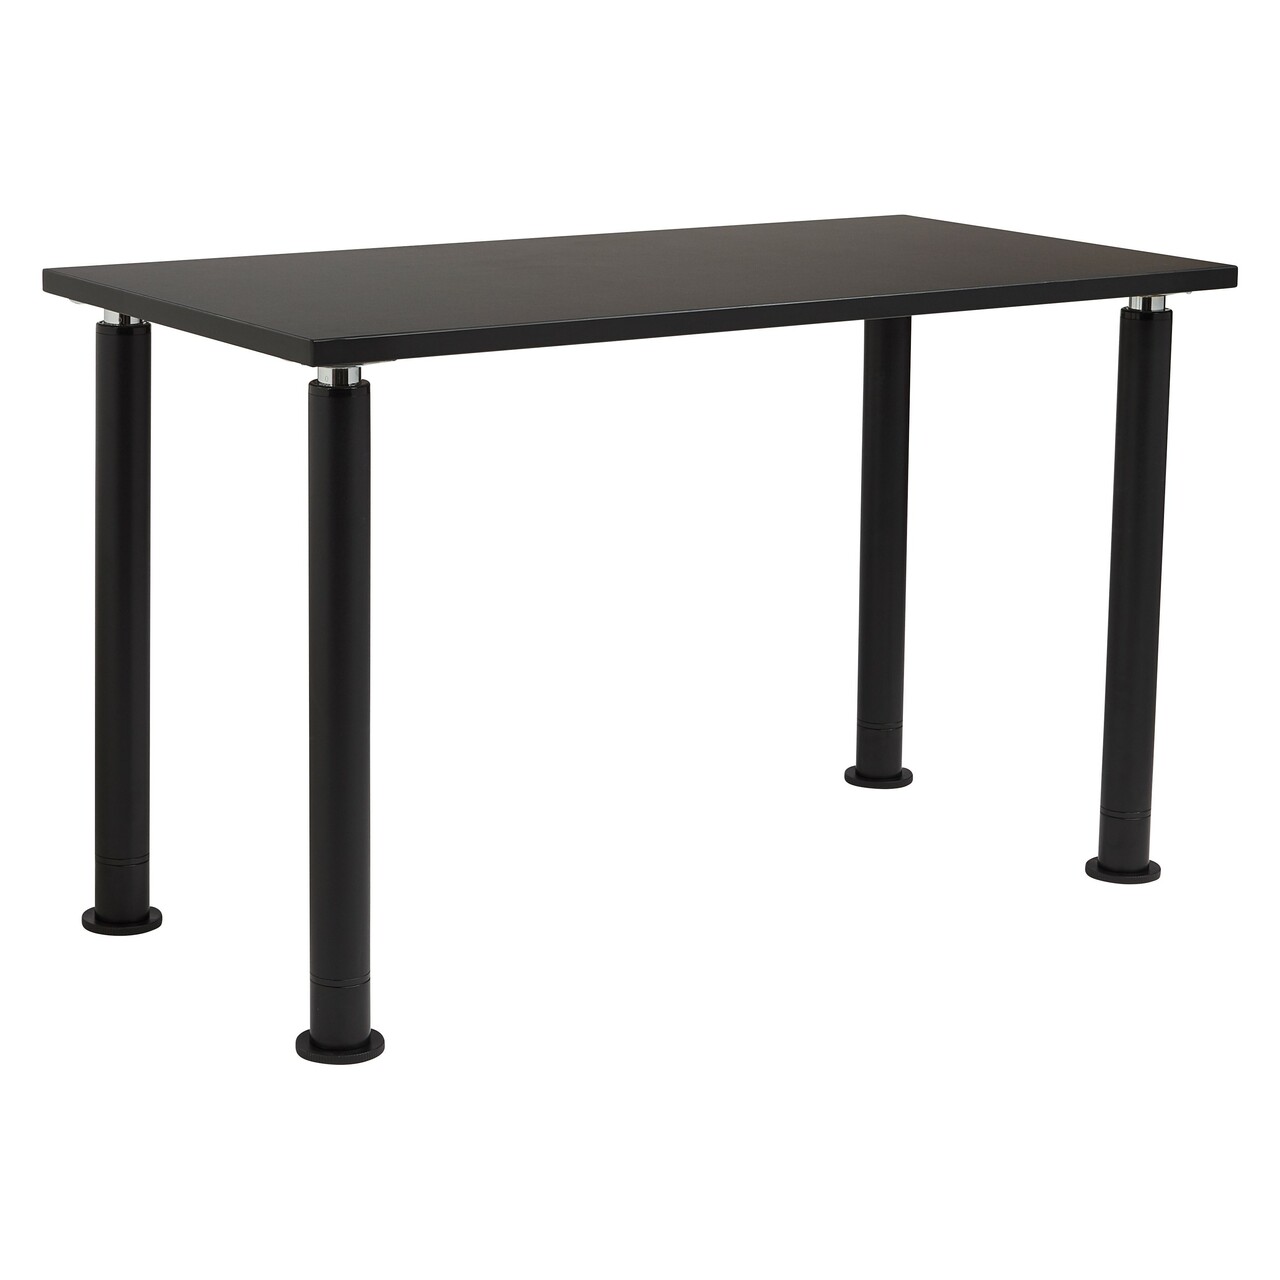 NPS Designer Science Table, 24"x48", Chemical Resistant Top - Black Top and Black Leg